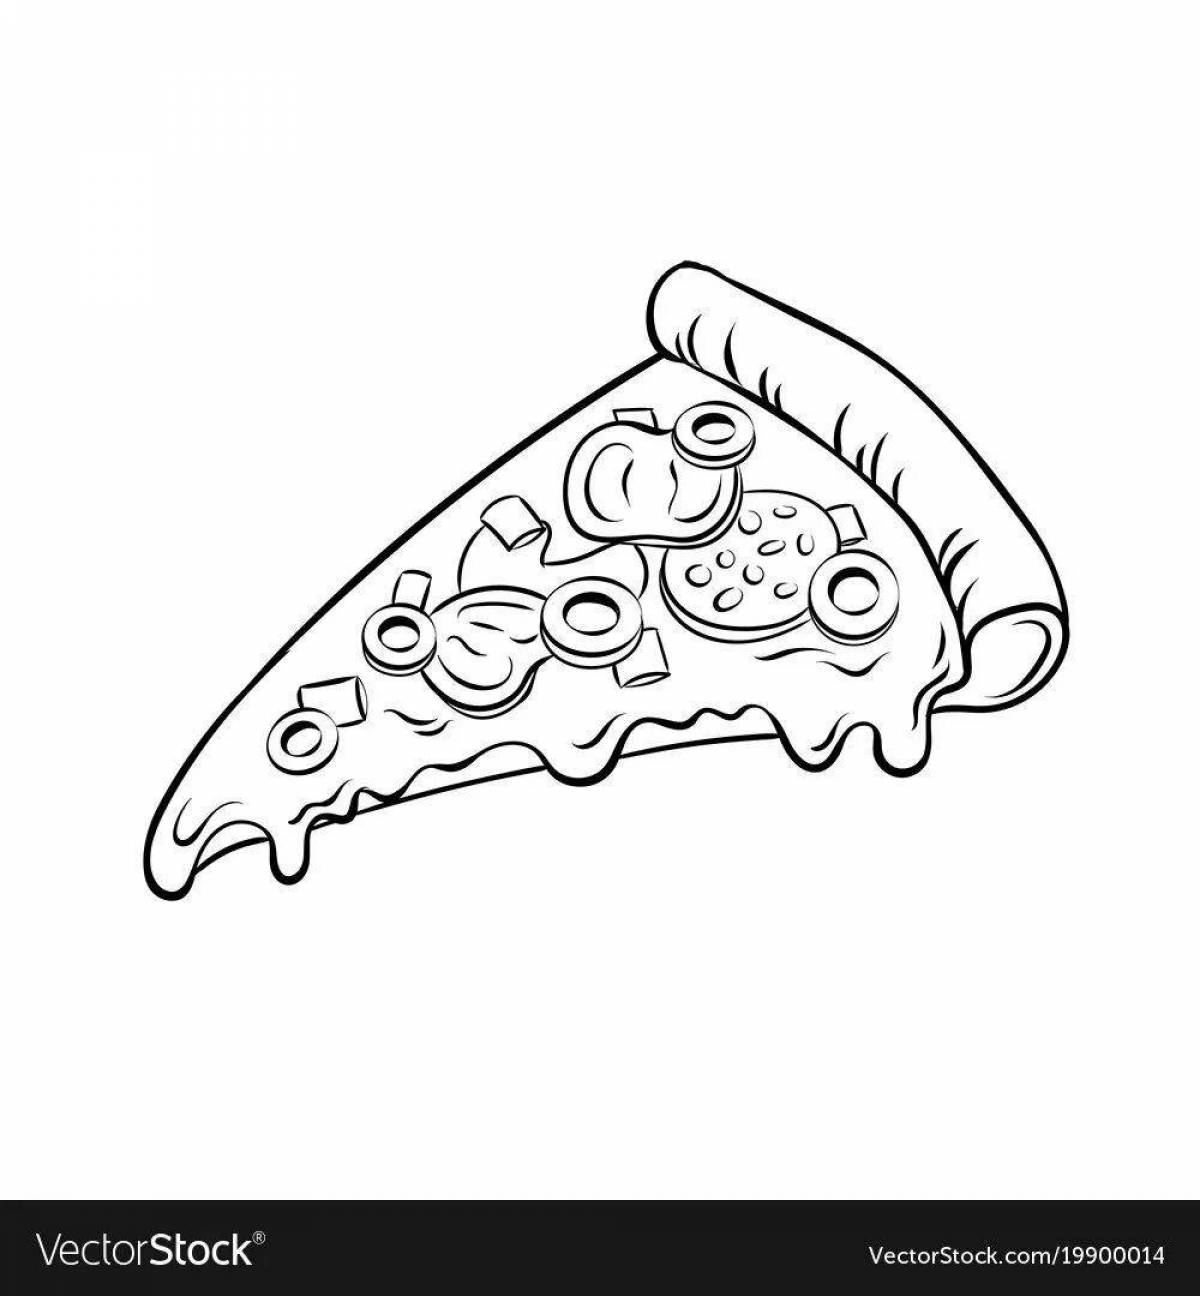 Teasing pizza slice coloring book